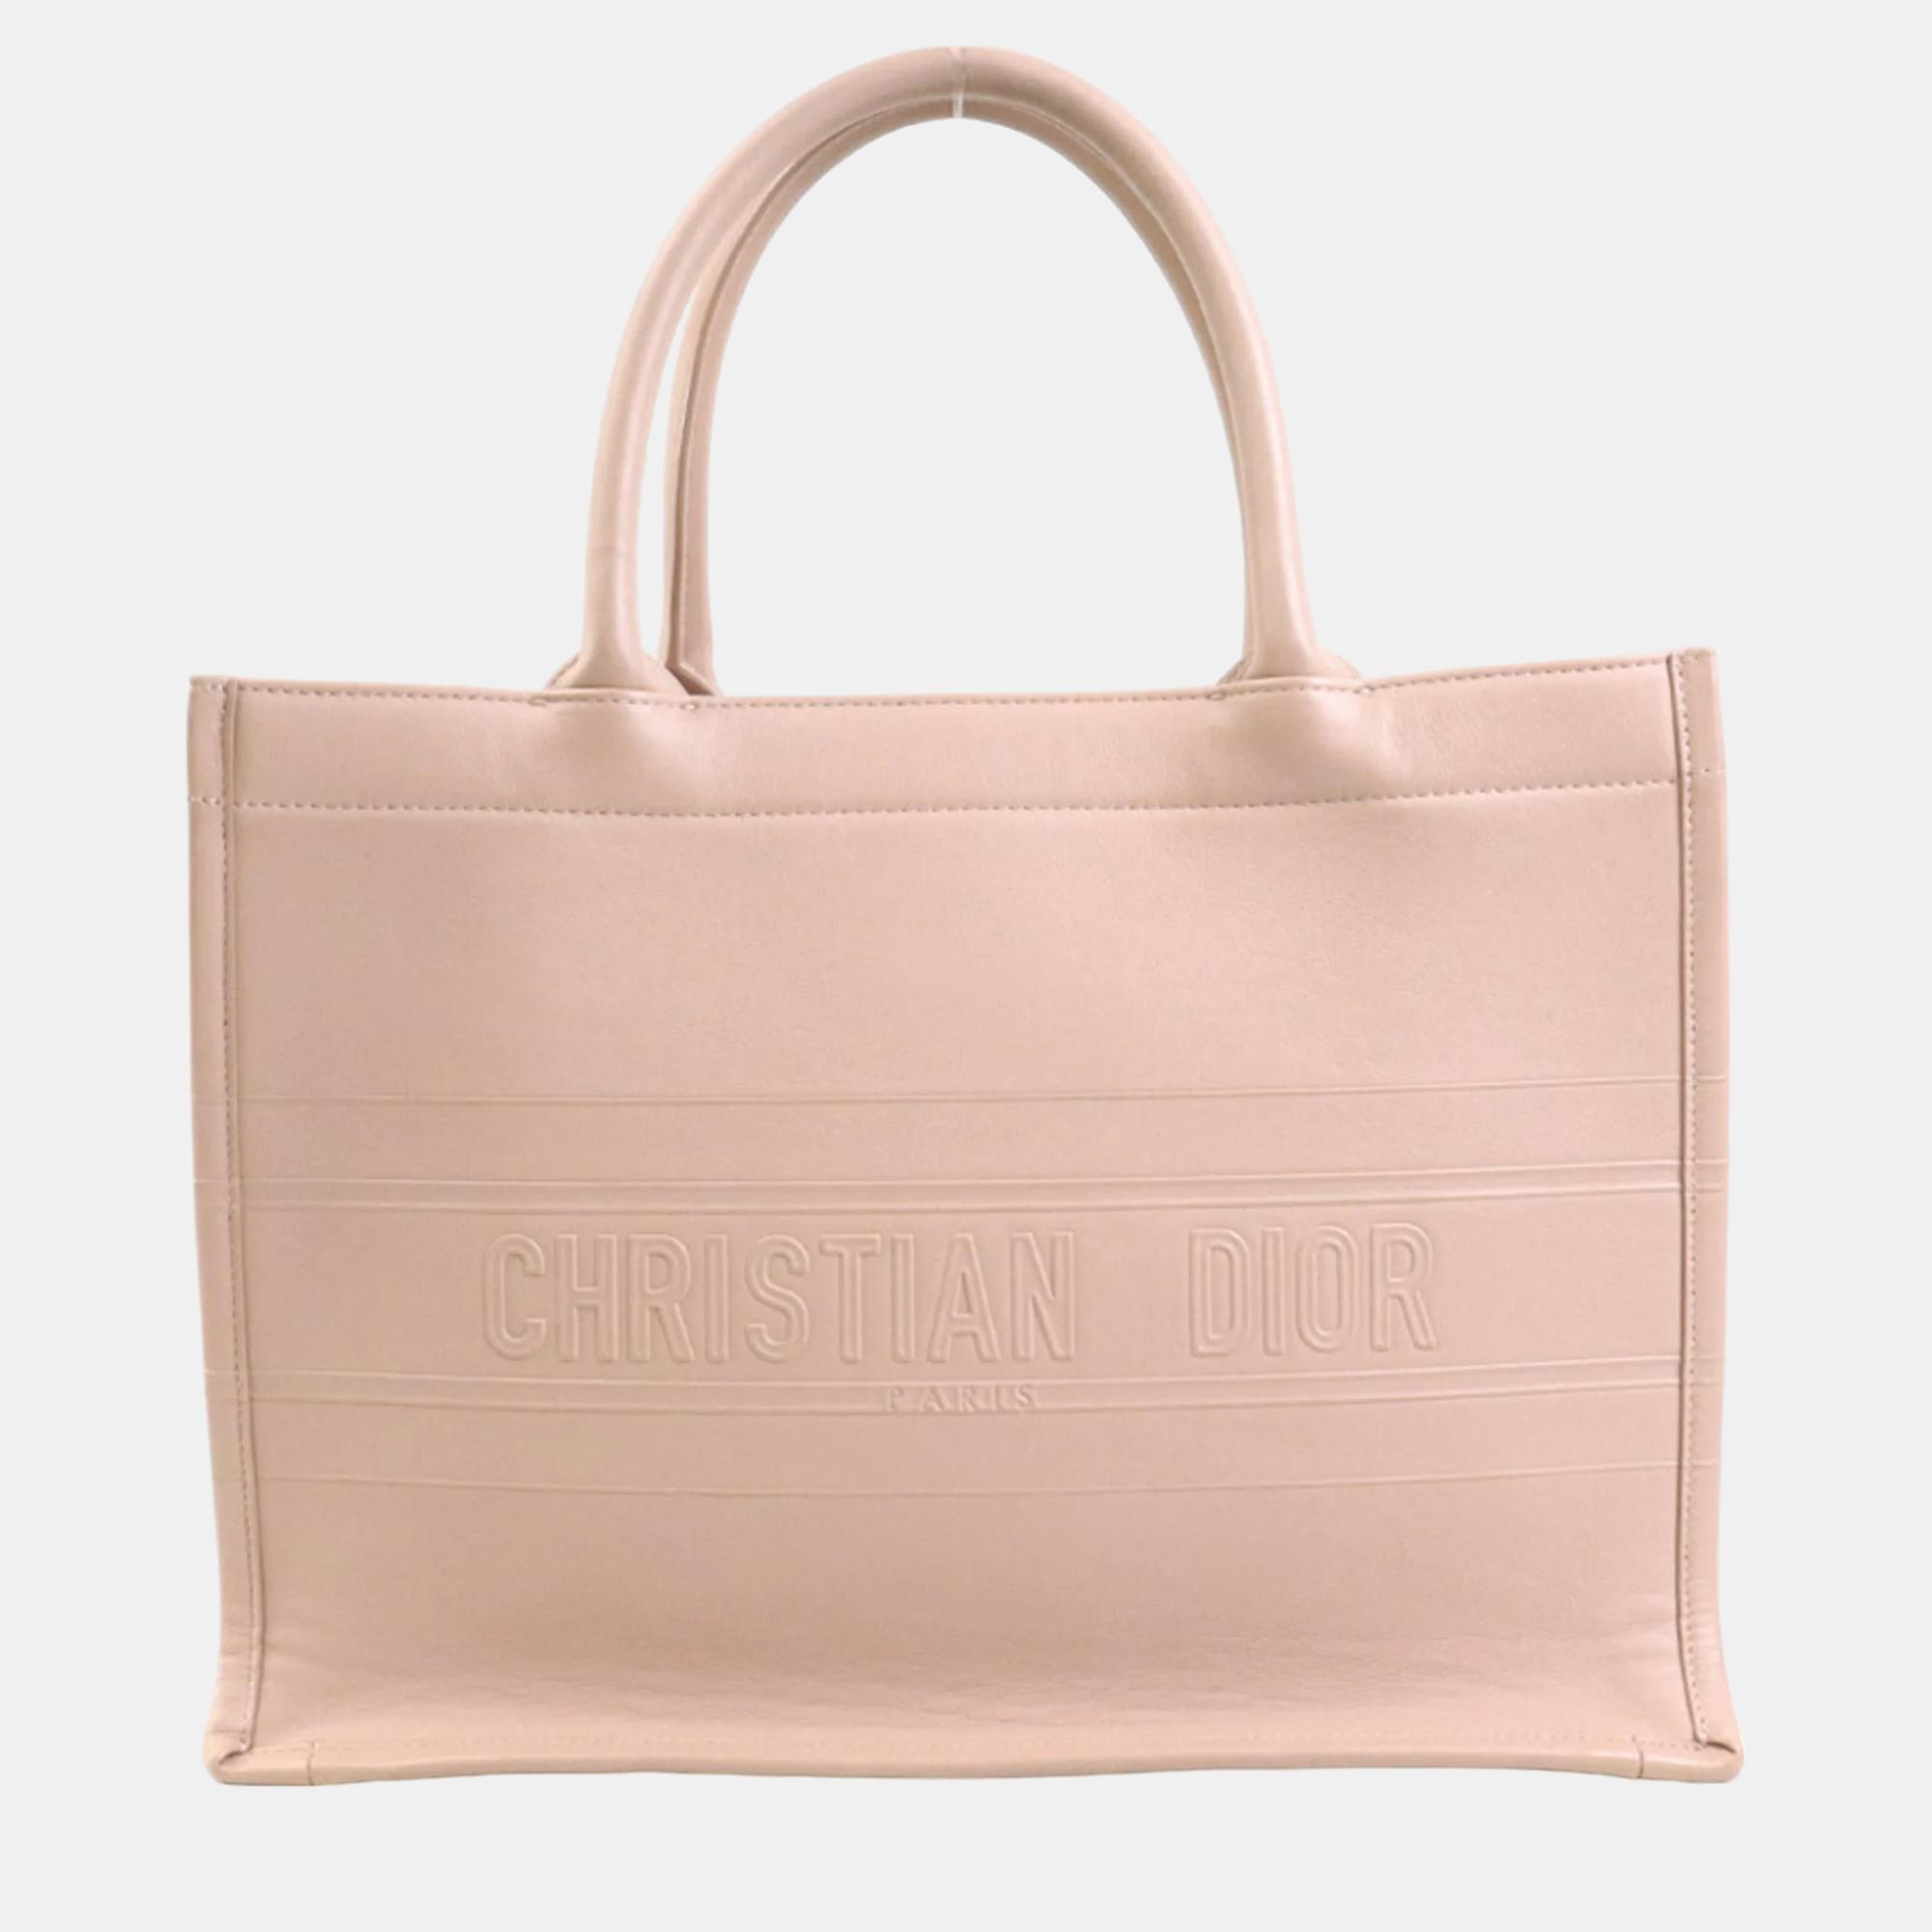 Dior pink leather embossed book tote bag